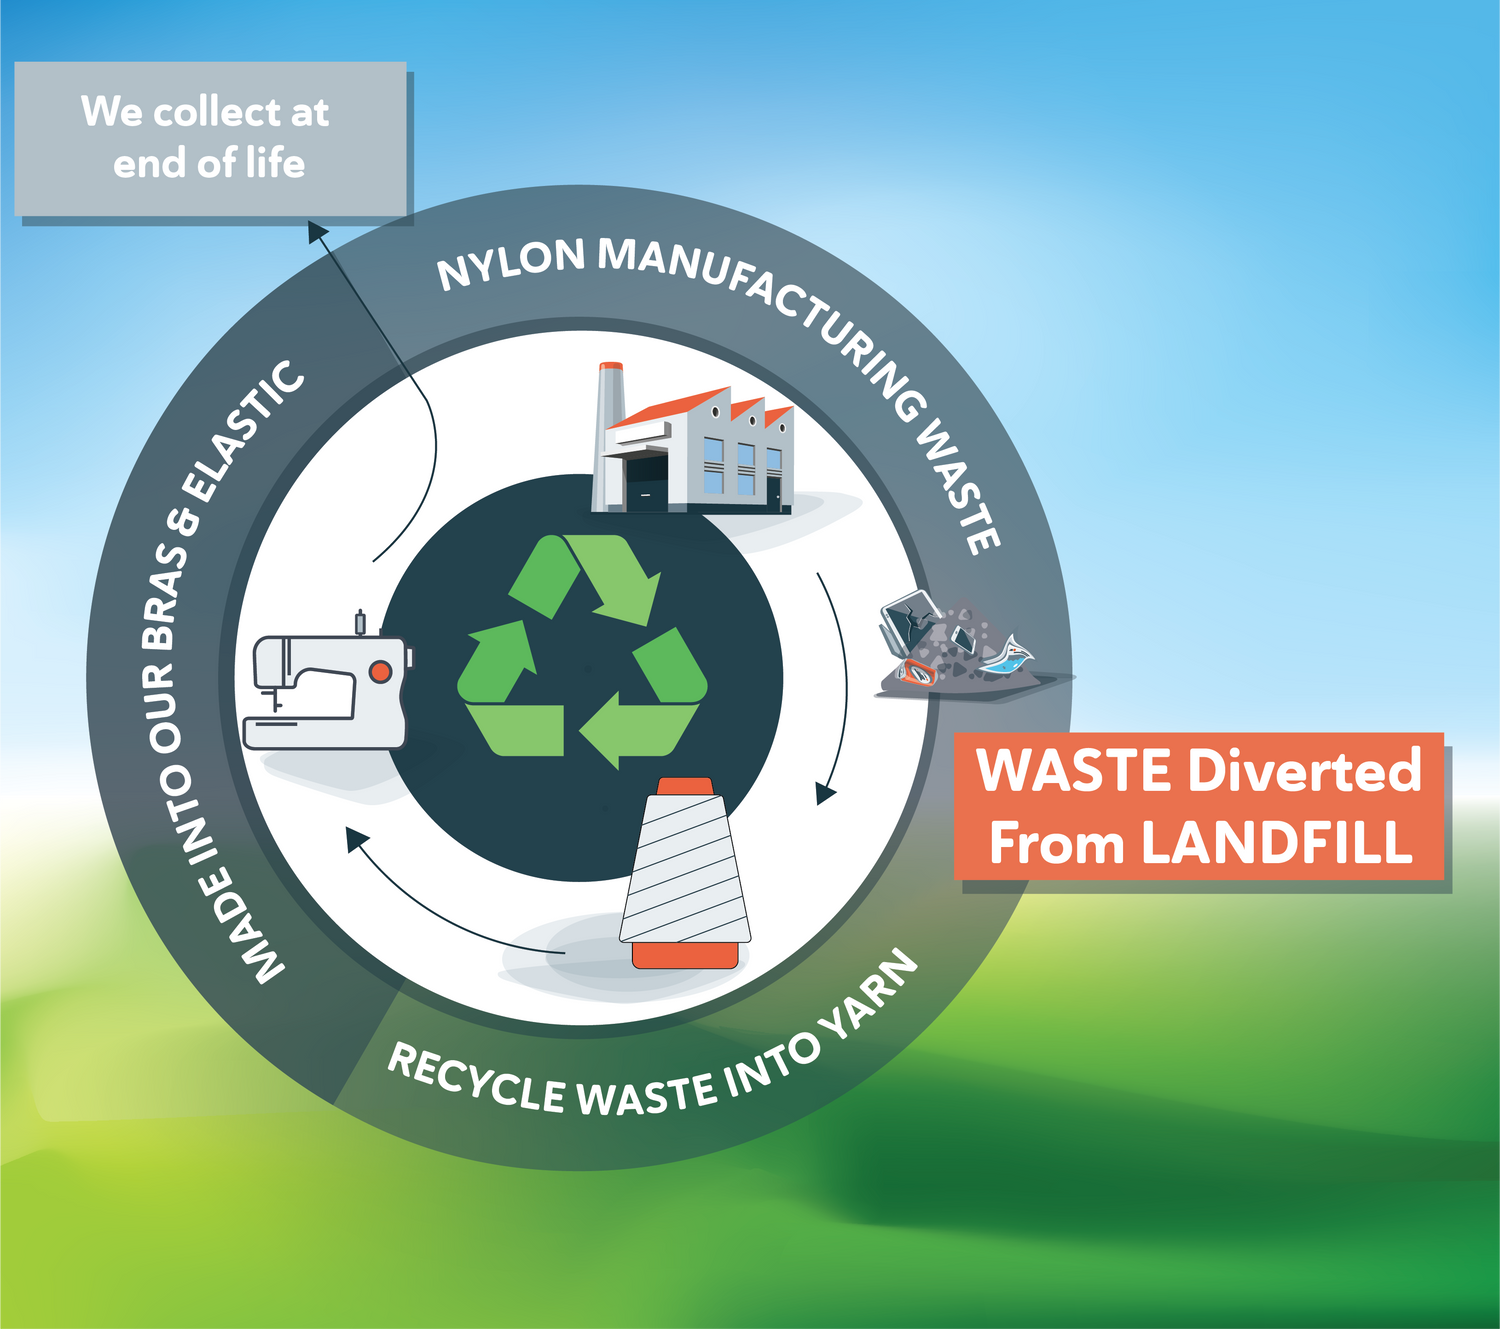 Diagram showing how nylon manufacturing waste is diverted from landfill and recycled into yarn to hep make Underwear for Humanity's bras and elastic